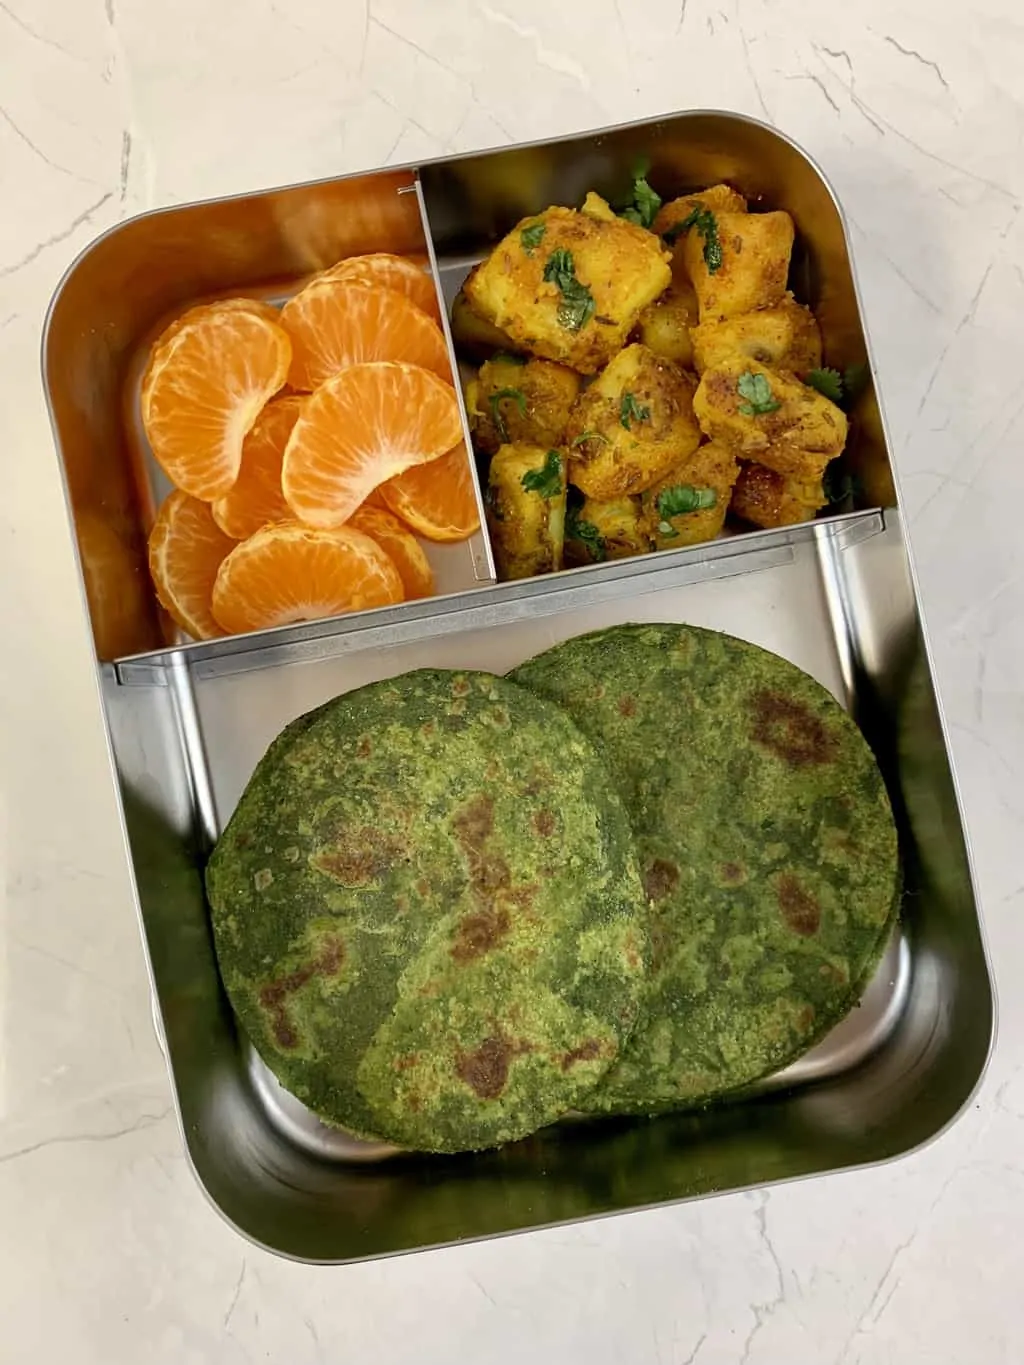 Palak Chapati + Jeera Aloo + Orange|Another quick and healthy lunchbox that cna ve prepared under 30 minutes|indianveggiedelight.com